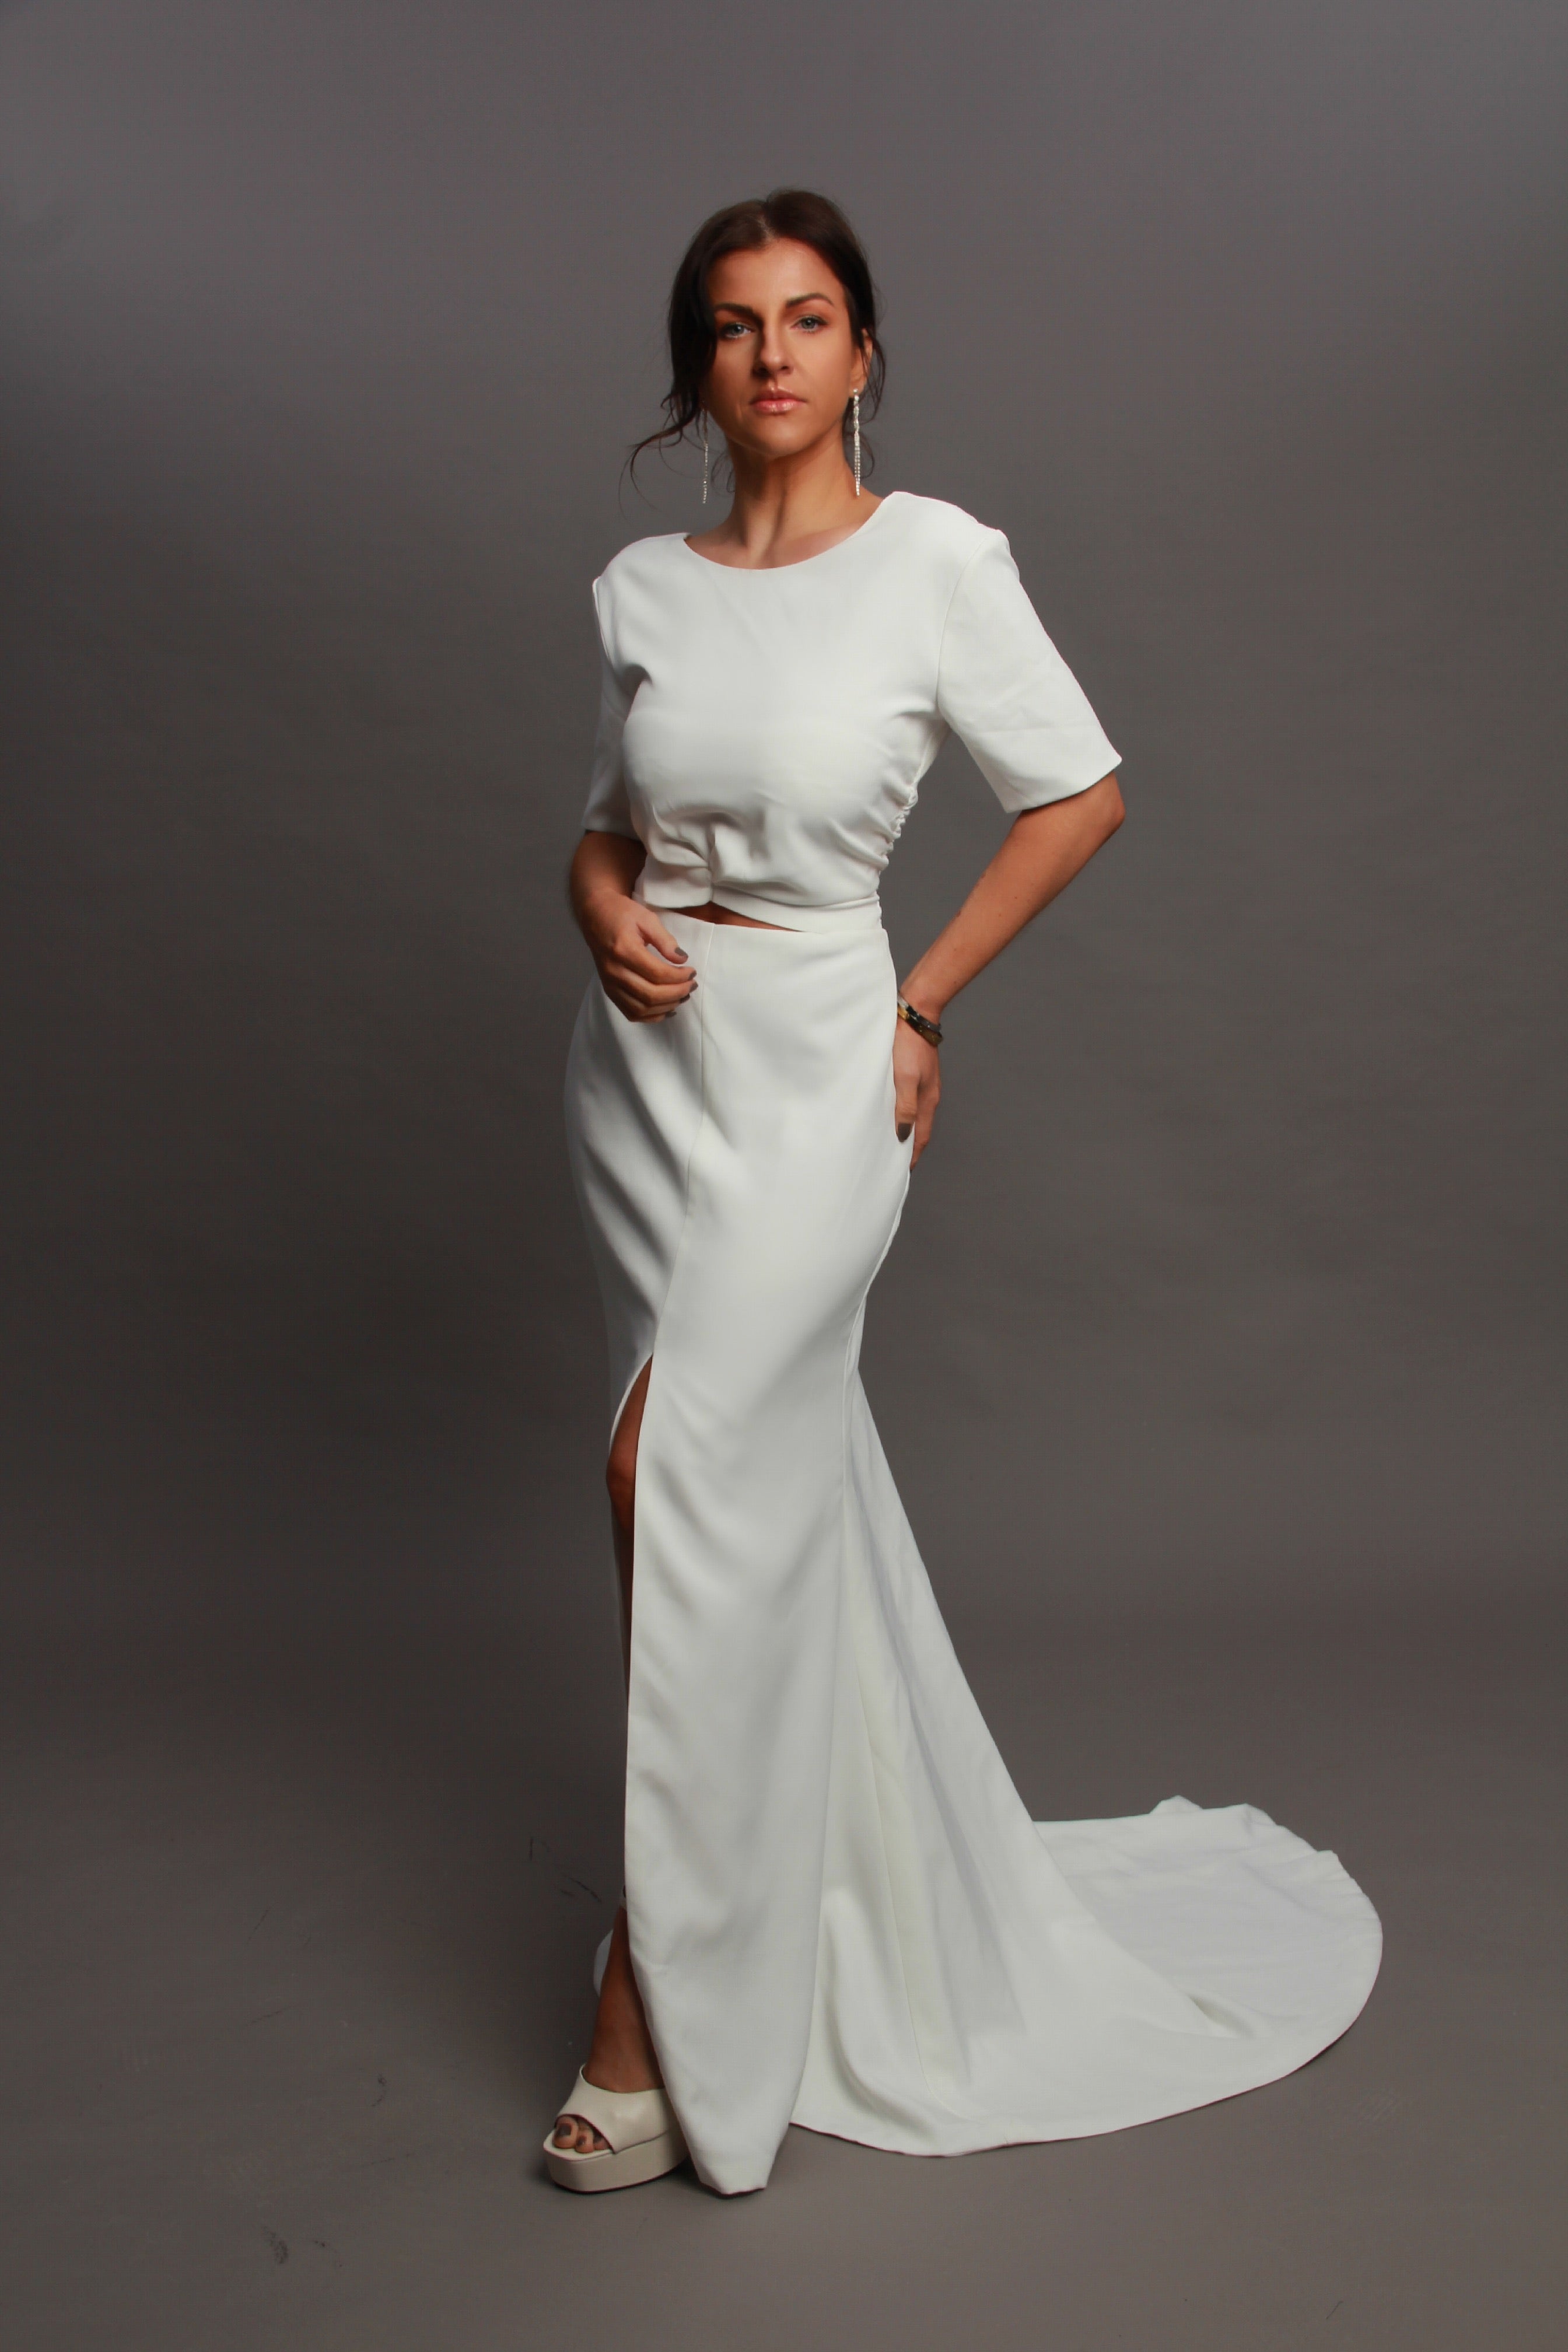 Try At Home - Crop Top Crepe Wedding Dress